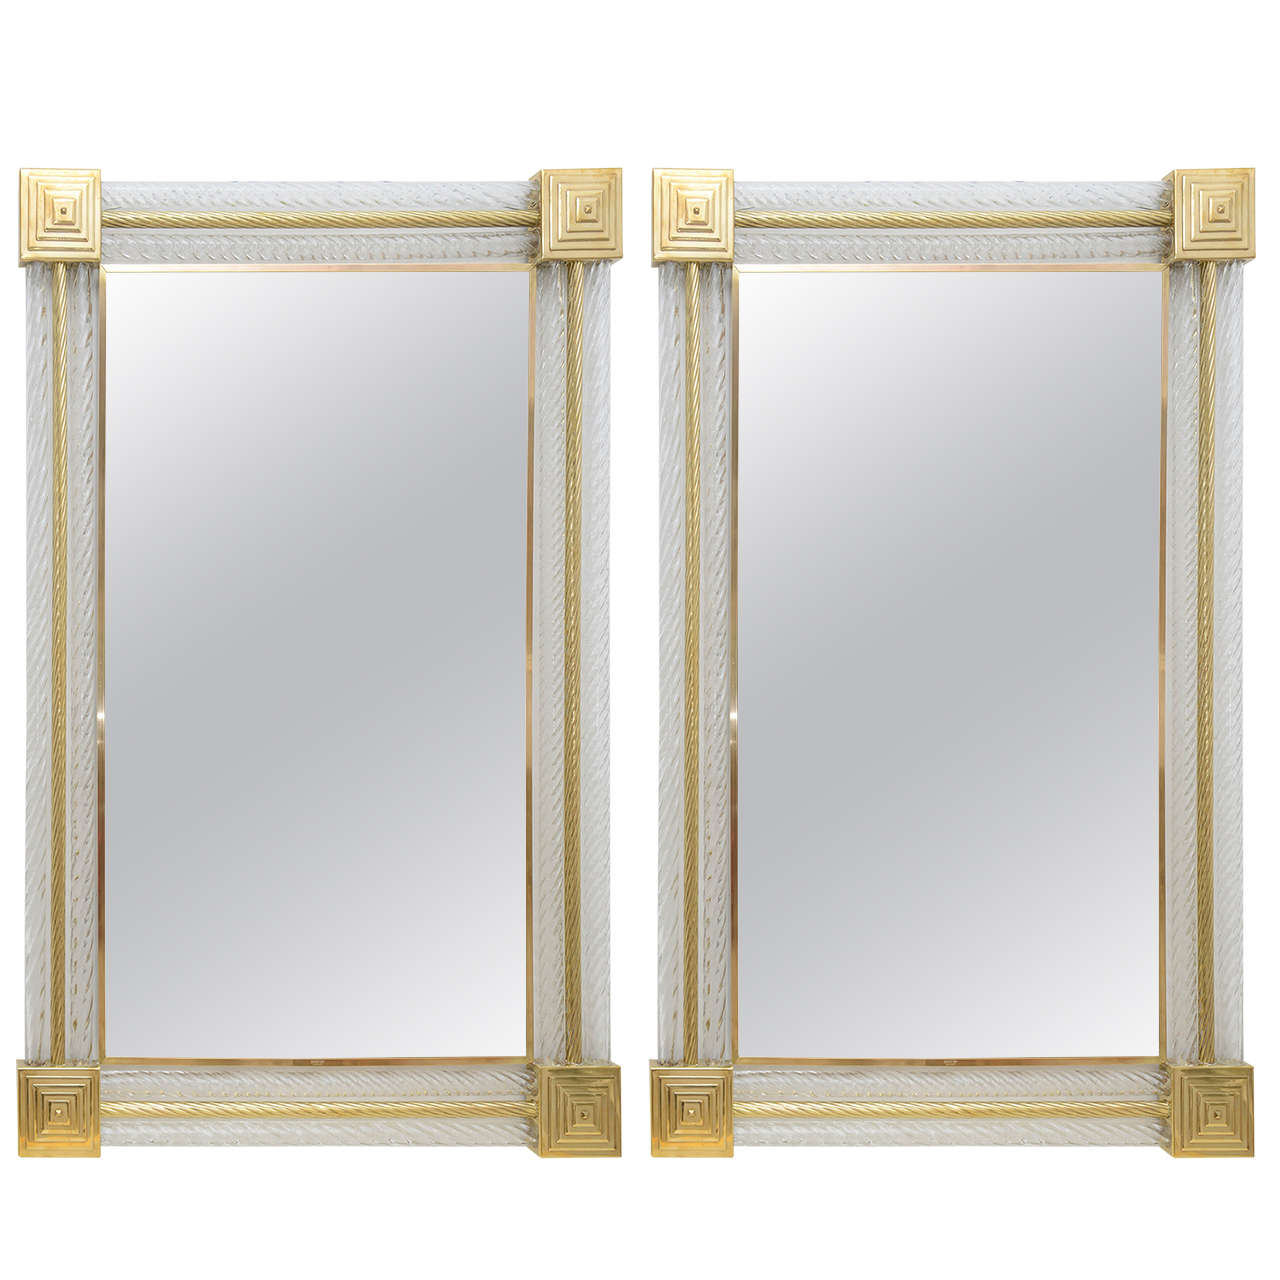 Vintage Brass and Clear Murano Glass Mirrors by Barovier & Toso